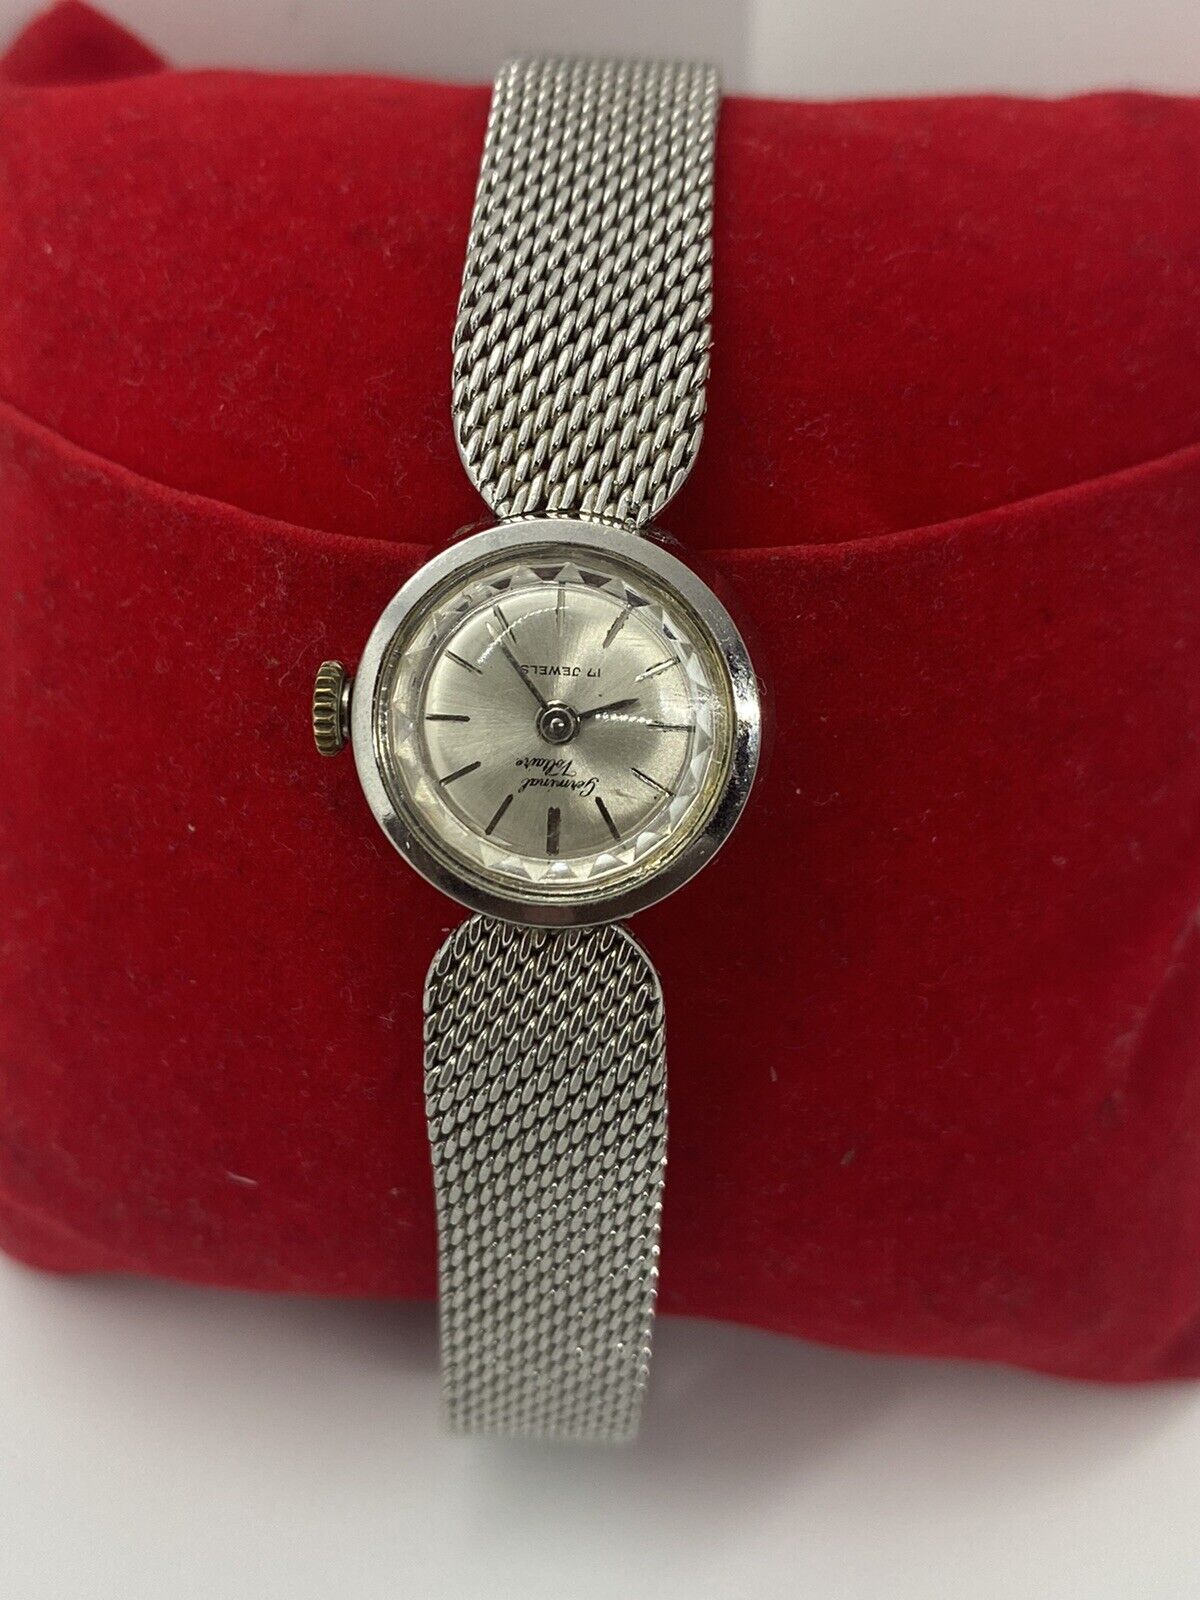 ~VINTAGE GERMINAL VOLTAIRE LADY'S 17 JEWELS SILVER TONE WATCH SWISS MADE~